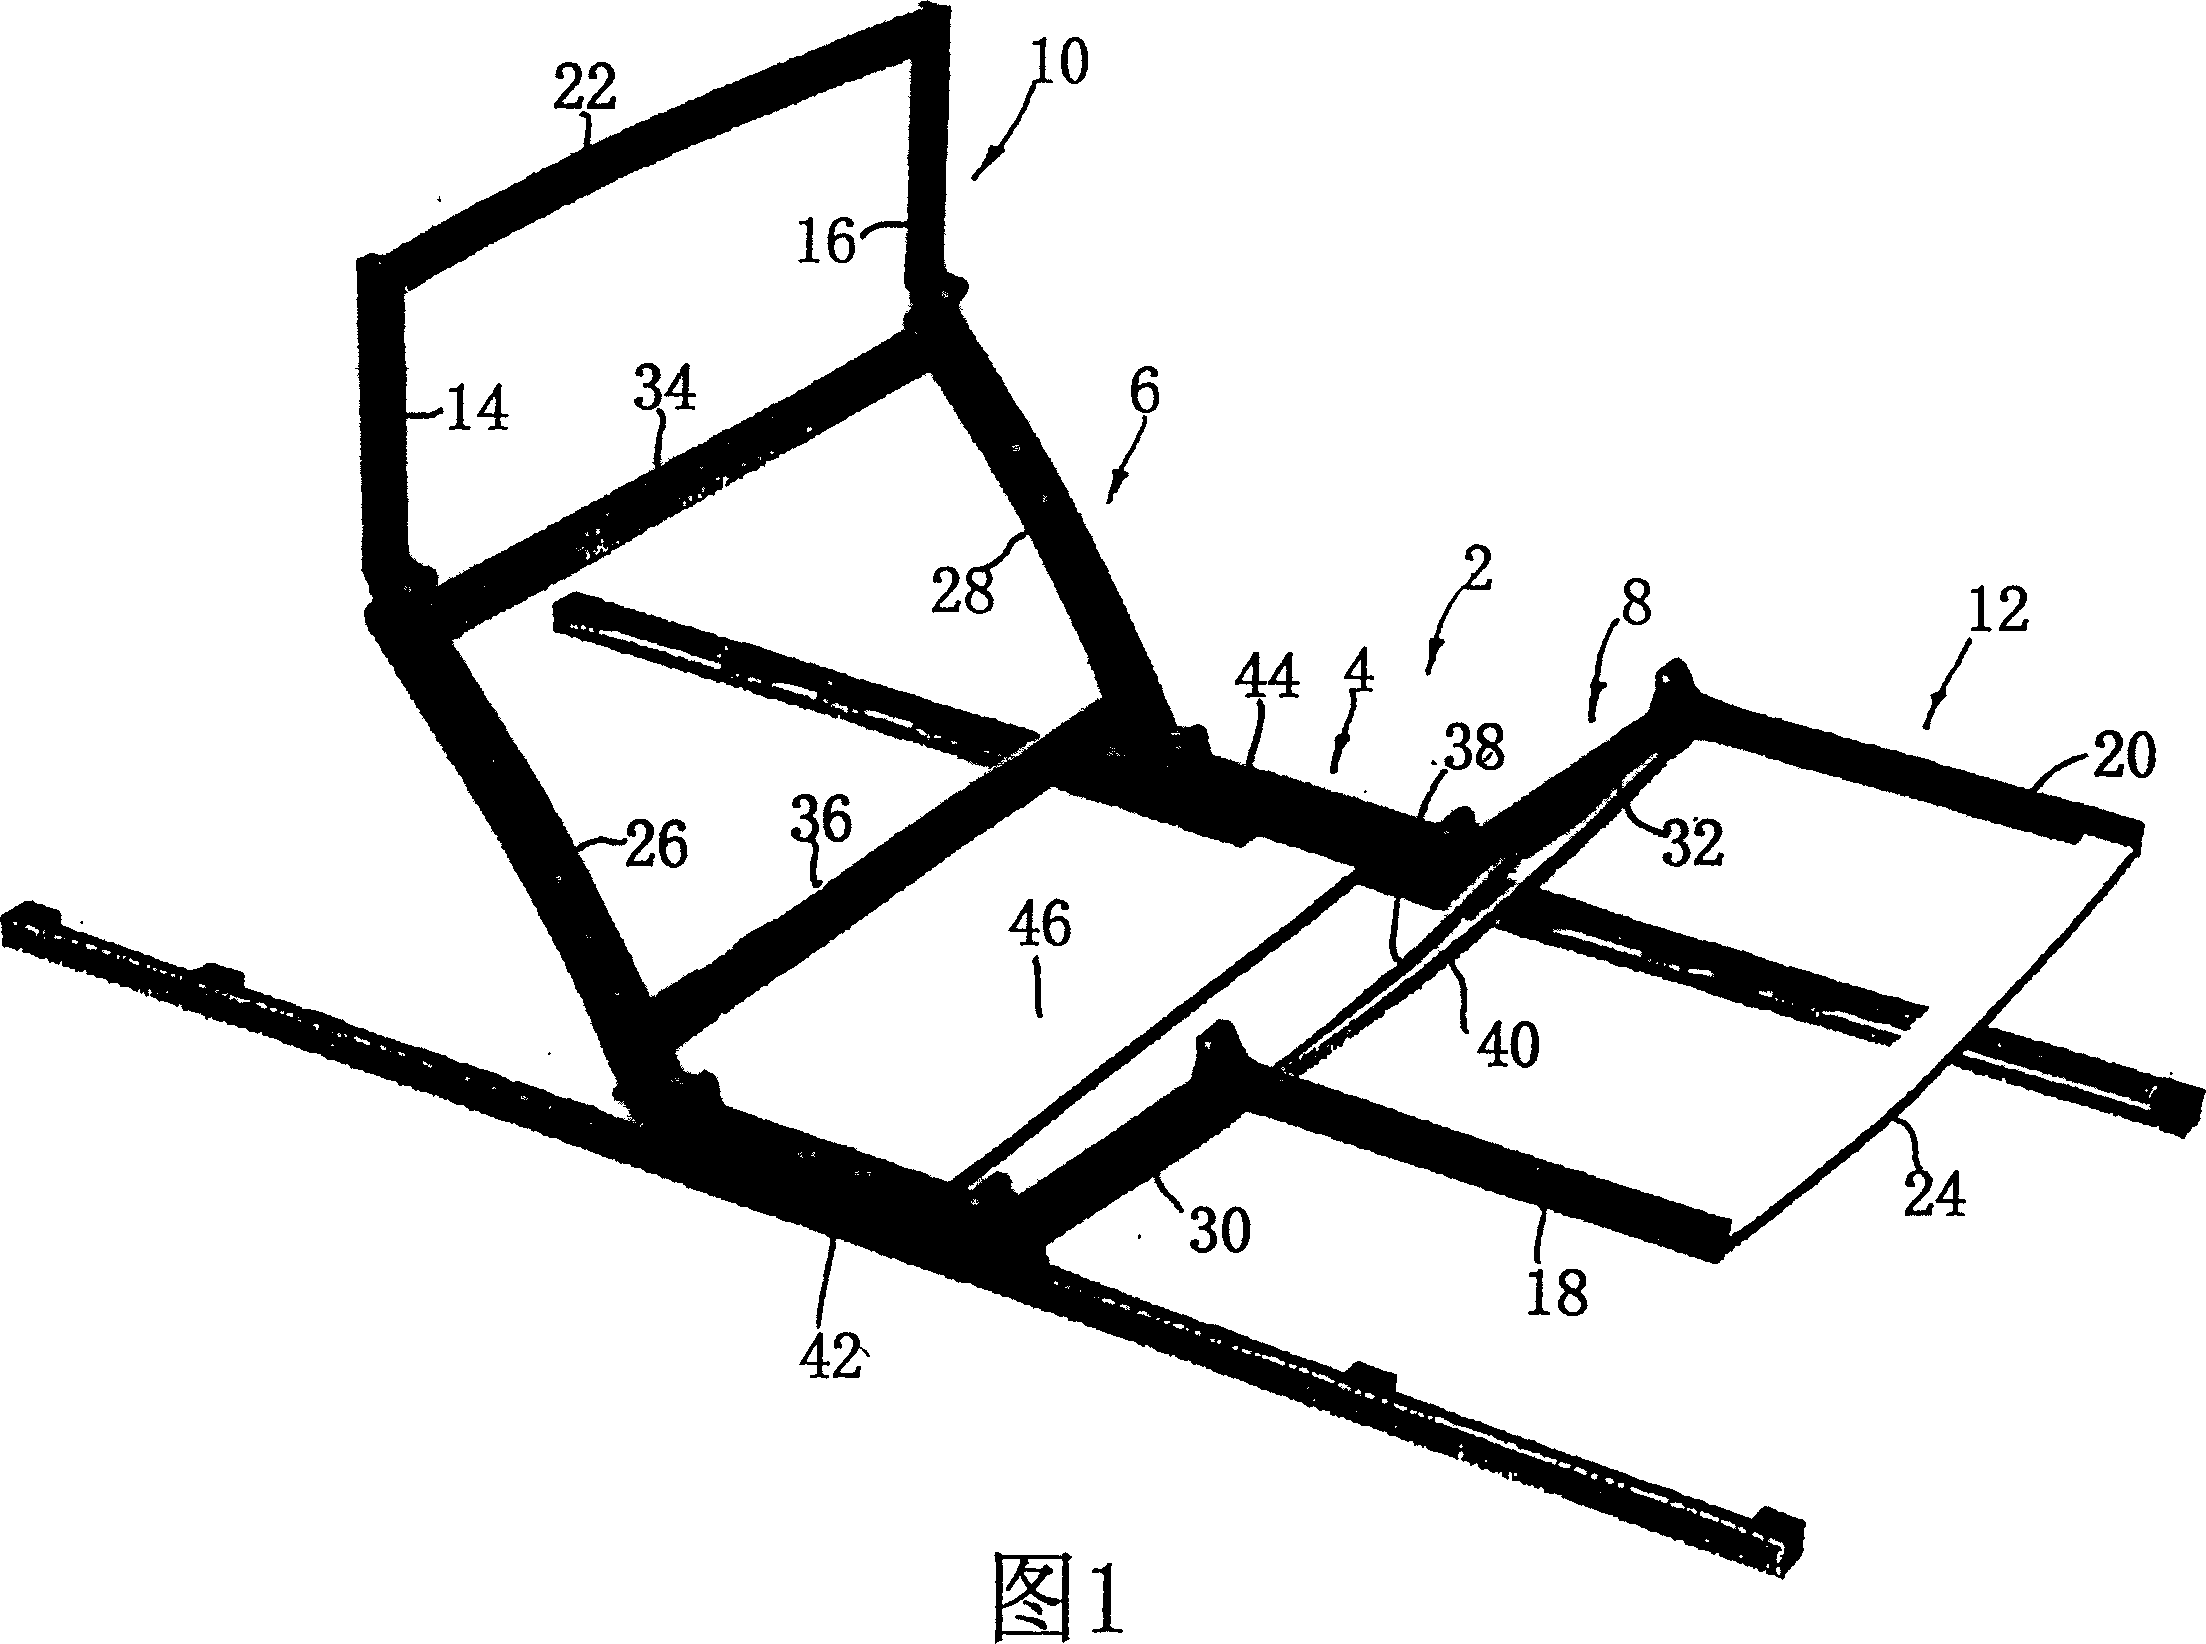 Motor-driven adjustable supporting device for upholstery of sitting and/or reclining furniture, for example of mattress or of bed